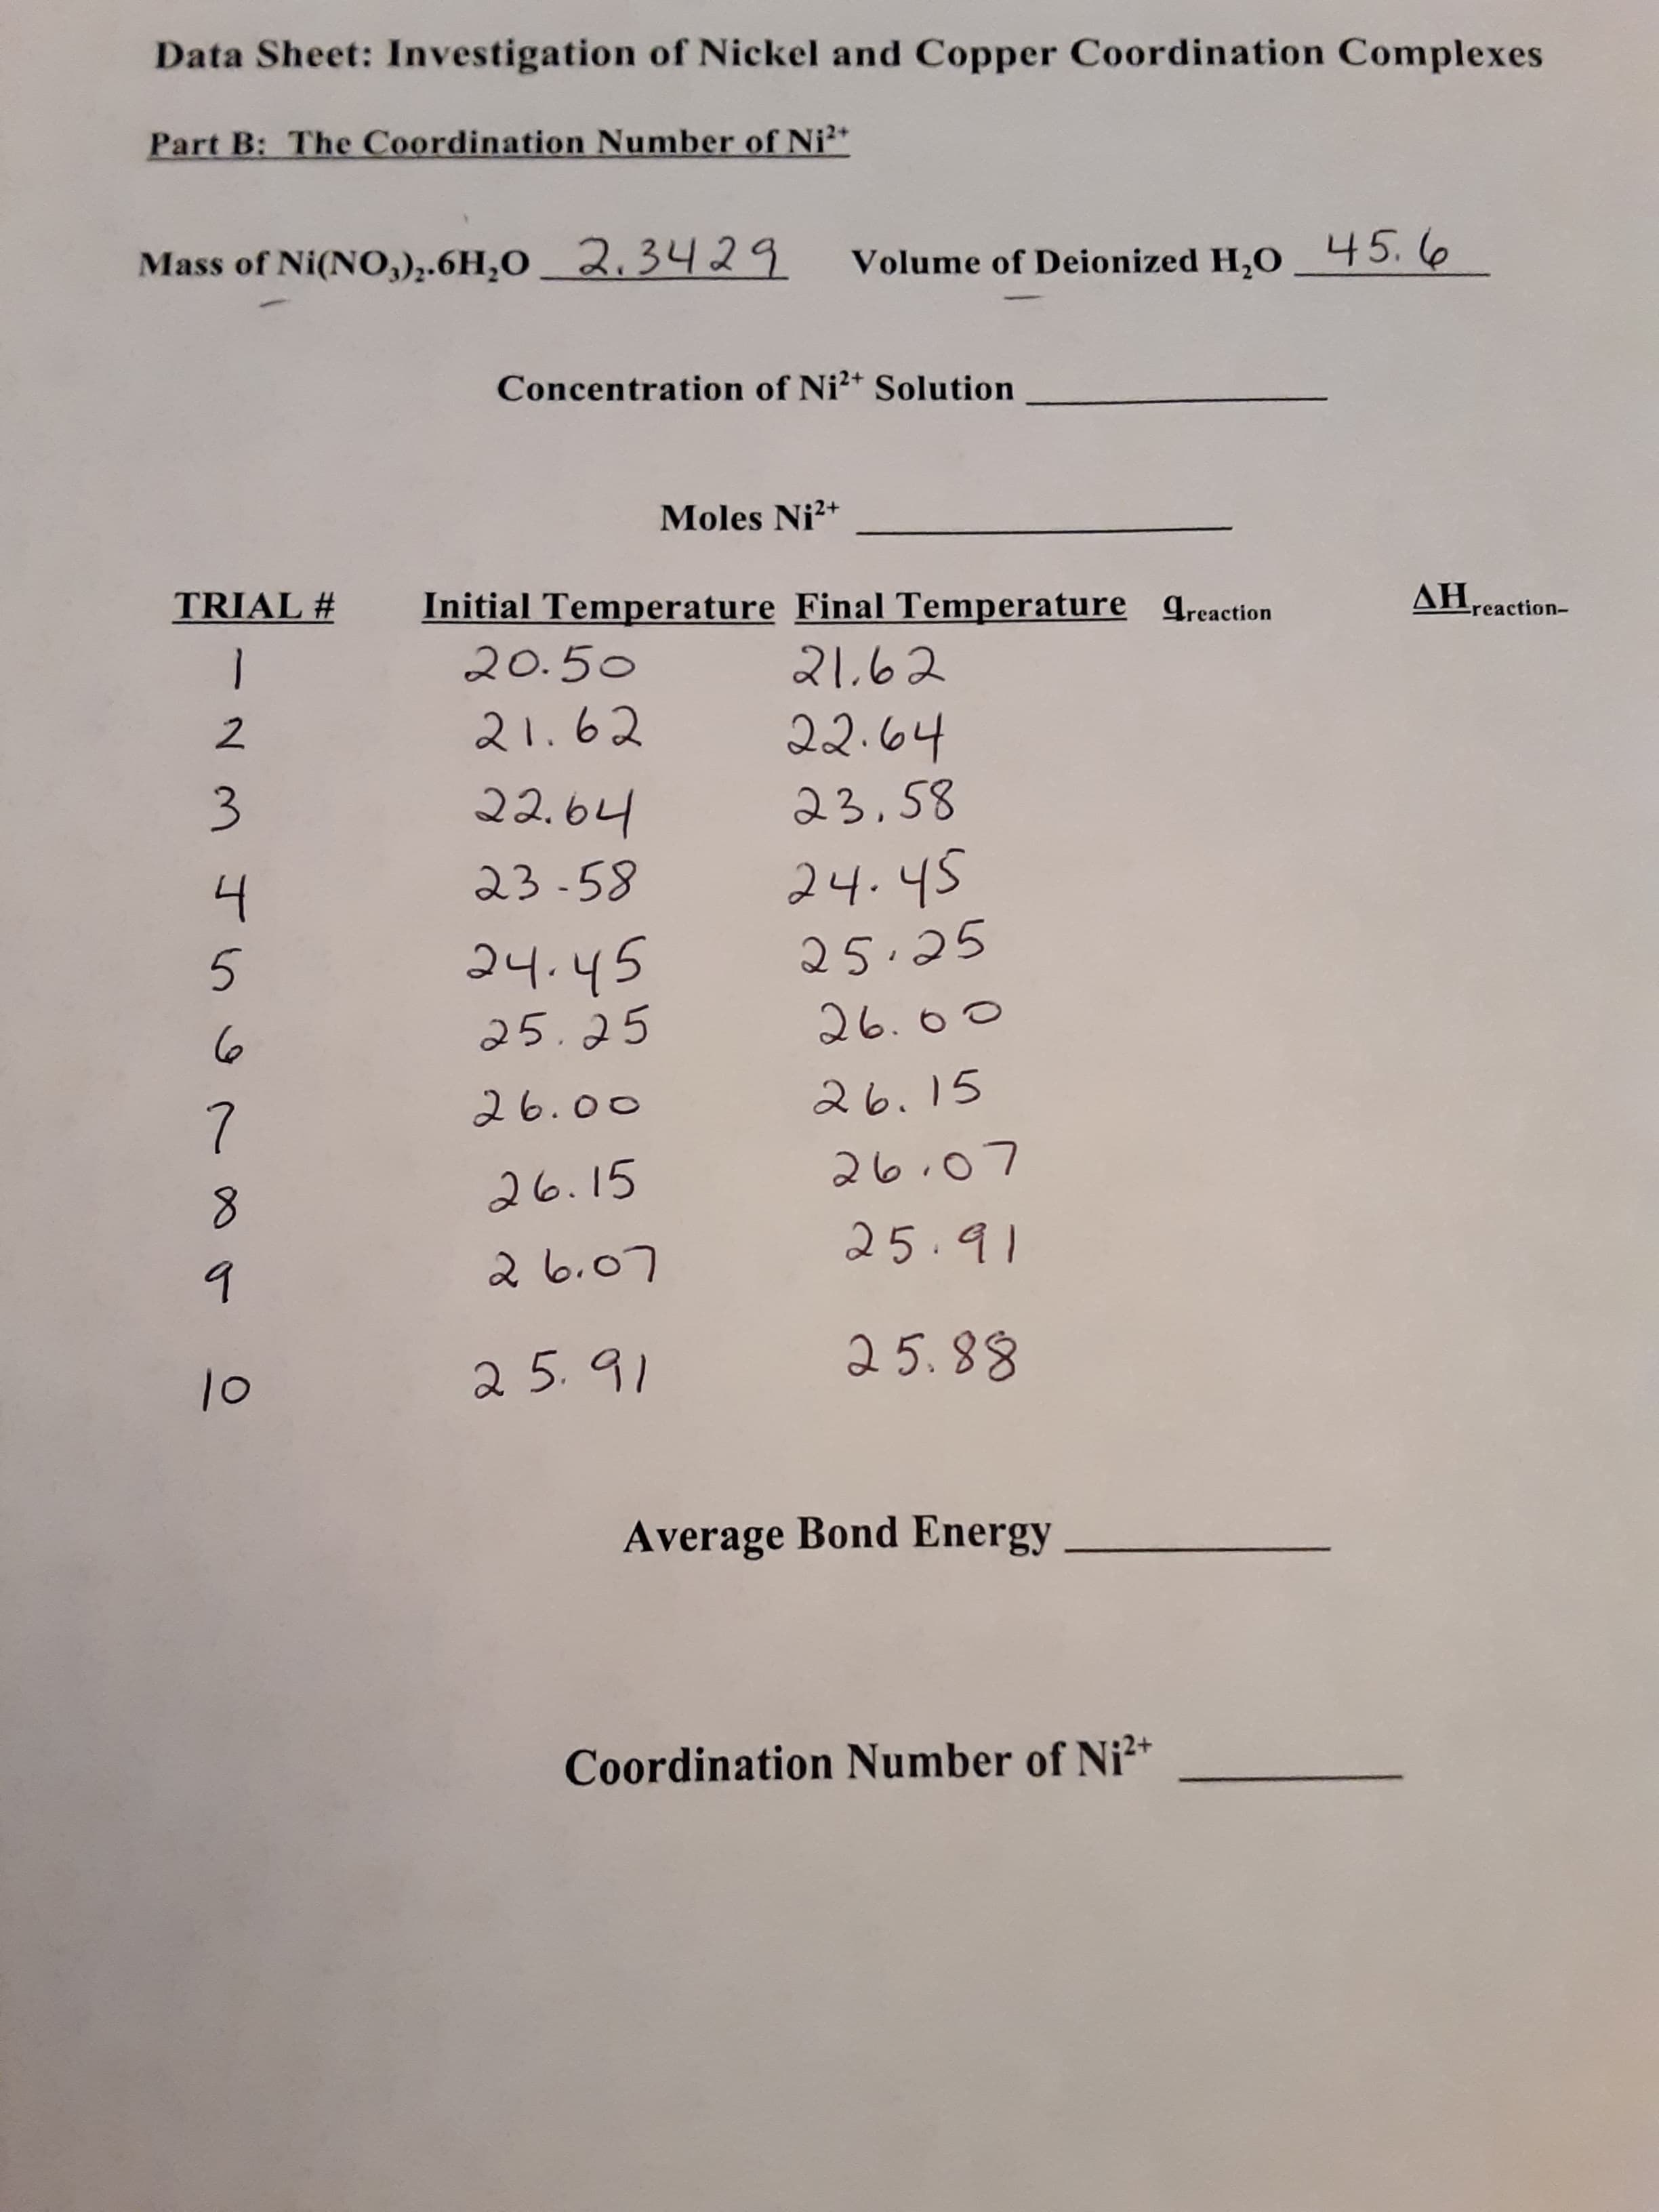 Data Sheet: Investigation of Nickel and Copper Coordination Complexes
Part B: The Coordination Number of Ni*
Mass of Ni(NO,)z.6H,O_2. 3429
Volume of Deionized H,O 45.6
Concentration of Ni?+ Solution
Moles Ni?+
TRIAL #
Initial Temperature Final Temperature greaction
AH,
reaction-
20.50
22.64
2.
22.64
23,58
3.
23.58
24.45
4.
24.45
5.
○99で
26.15
26.07
25.91
01
88.8
Average Bond Energy
Coordination Number of Ni²+
